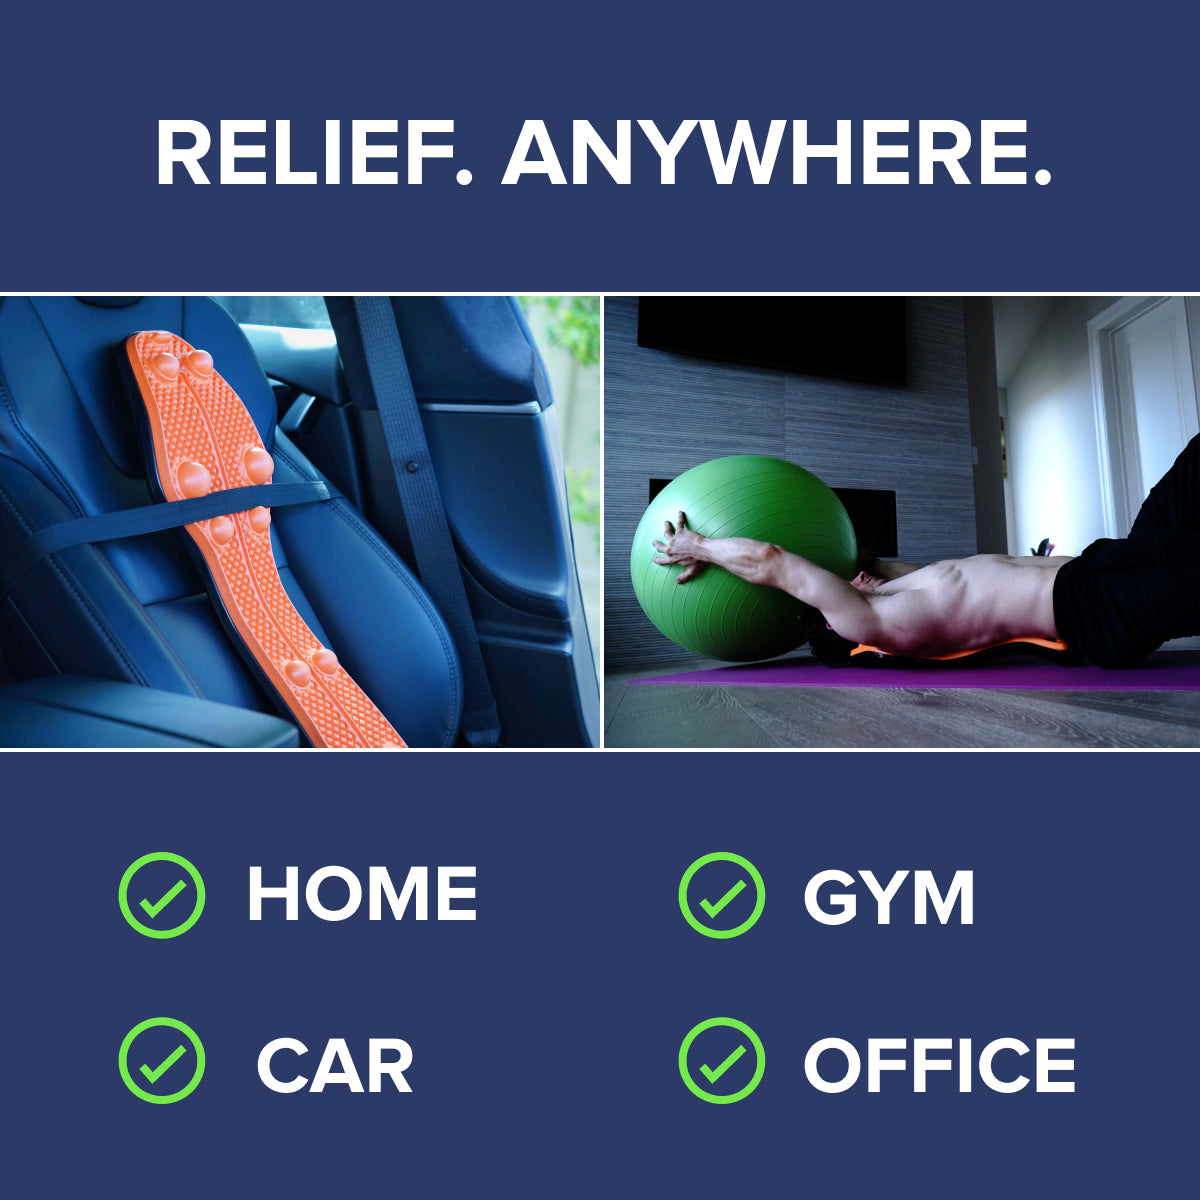 Examples of the different environments where the Trigger Point Rocker can be used, including home, the gym, your car, and the office, for effective muscle tension relief anytime, anywhere.